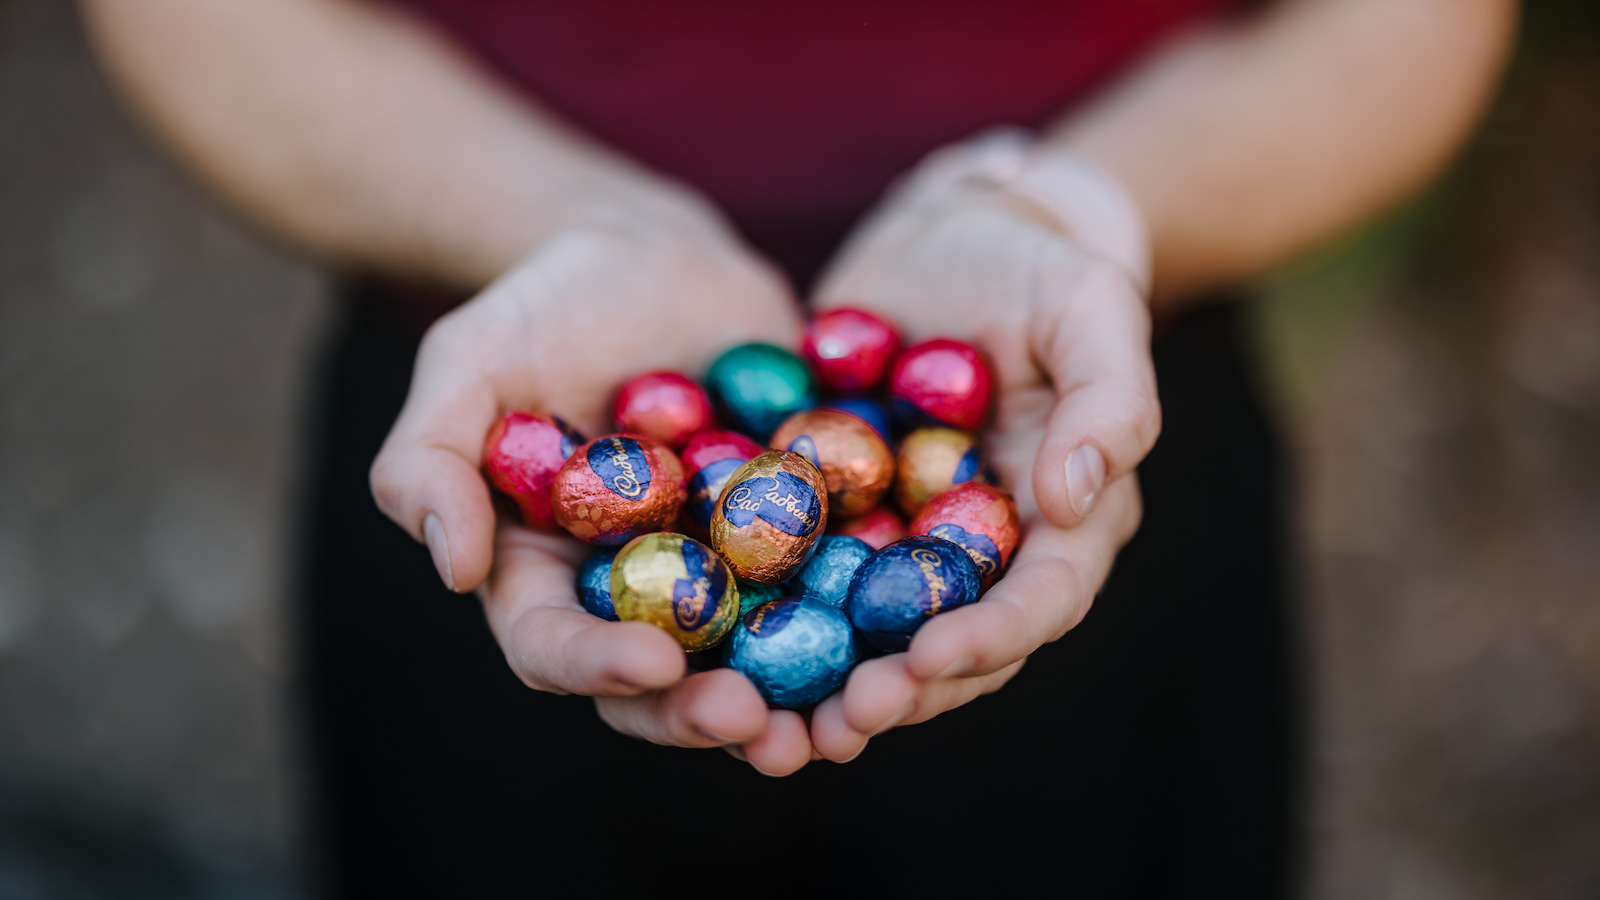 Steph holds a handful of chocolate Easter eggs in her outstretched hands. Photo: Michael Gray